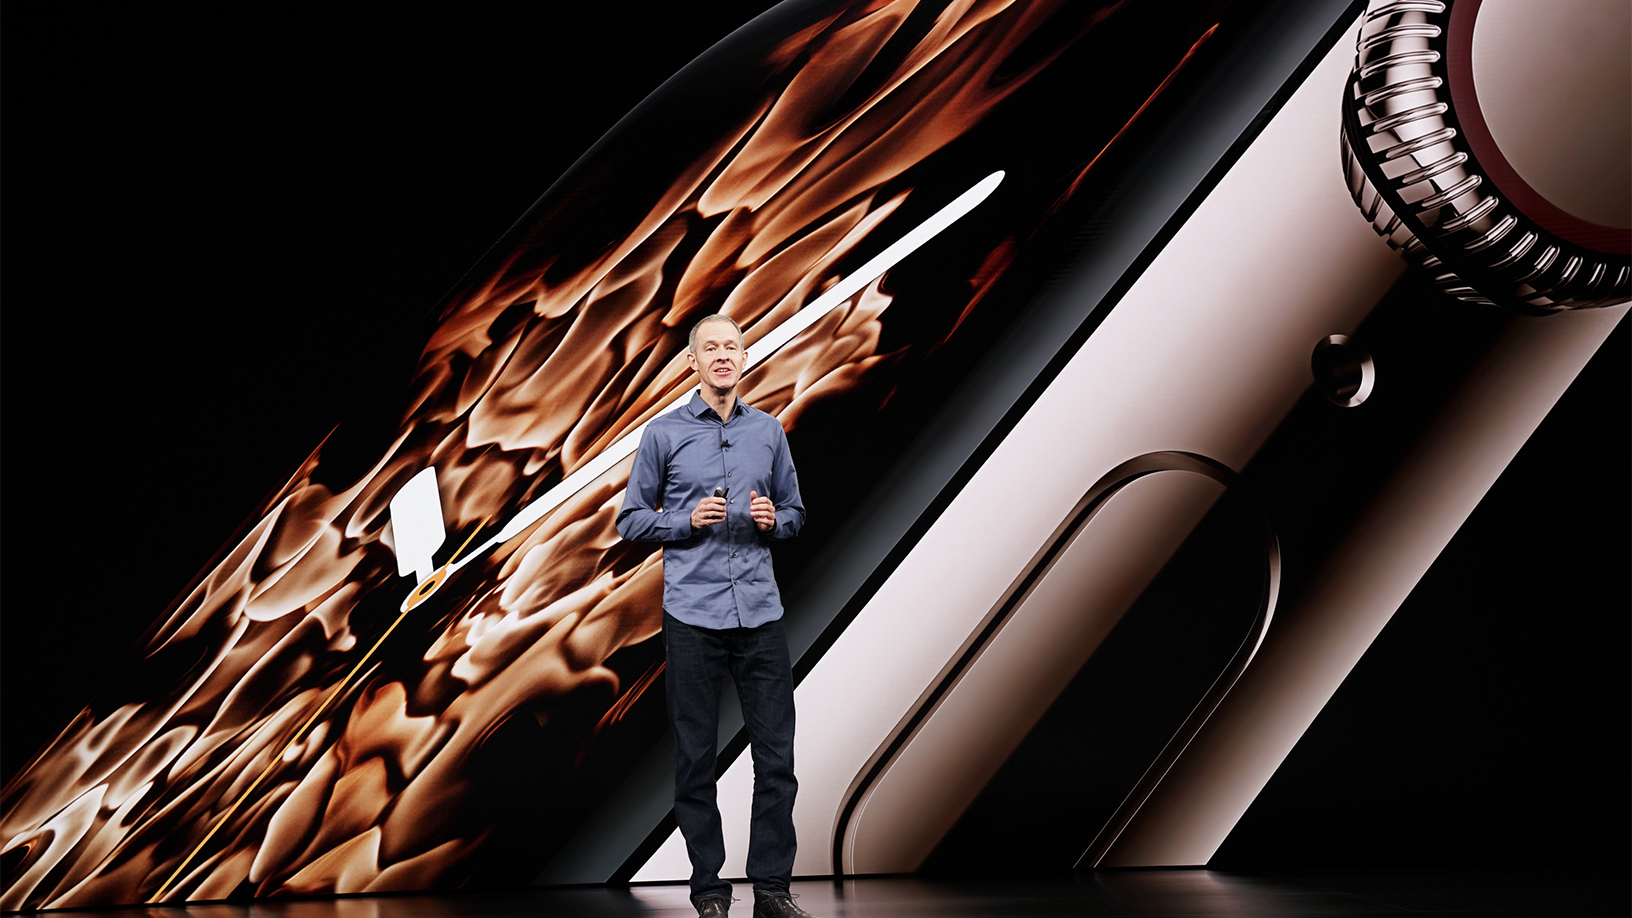 Apple Watch launch event on stage